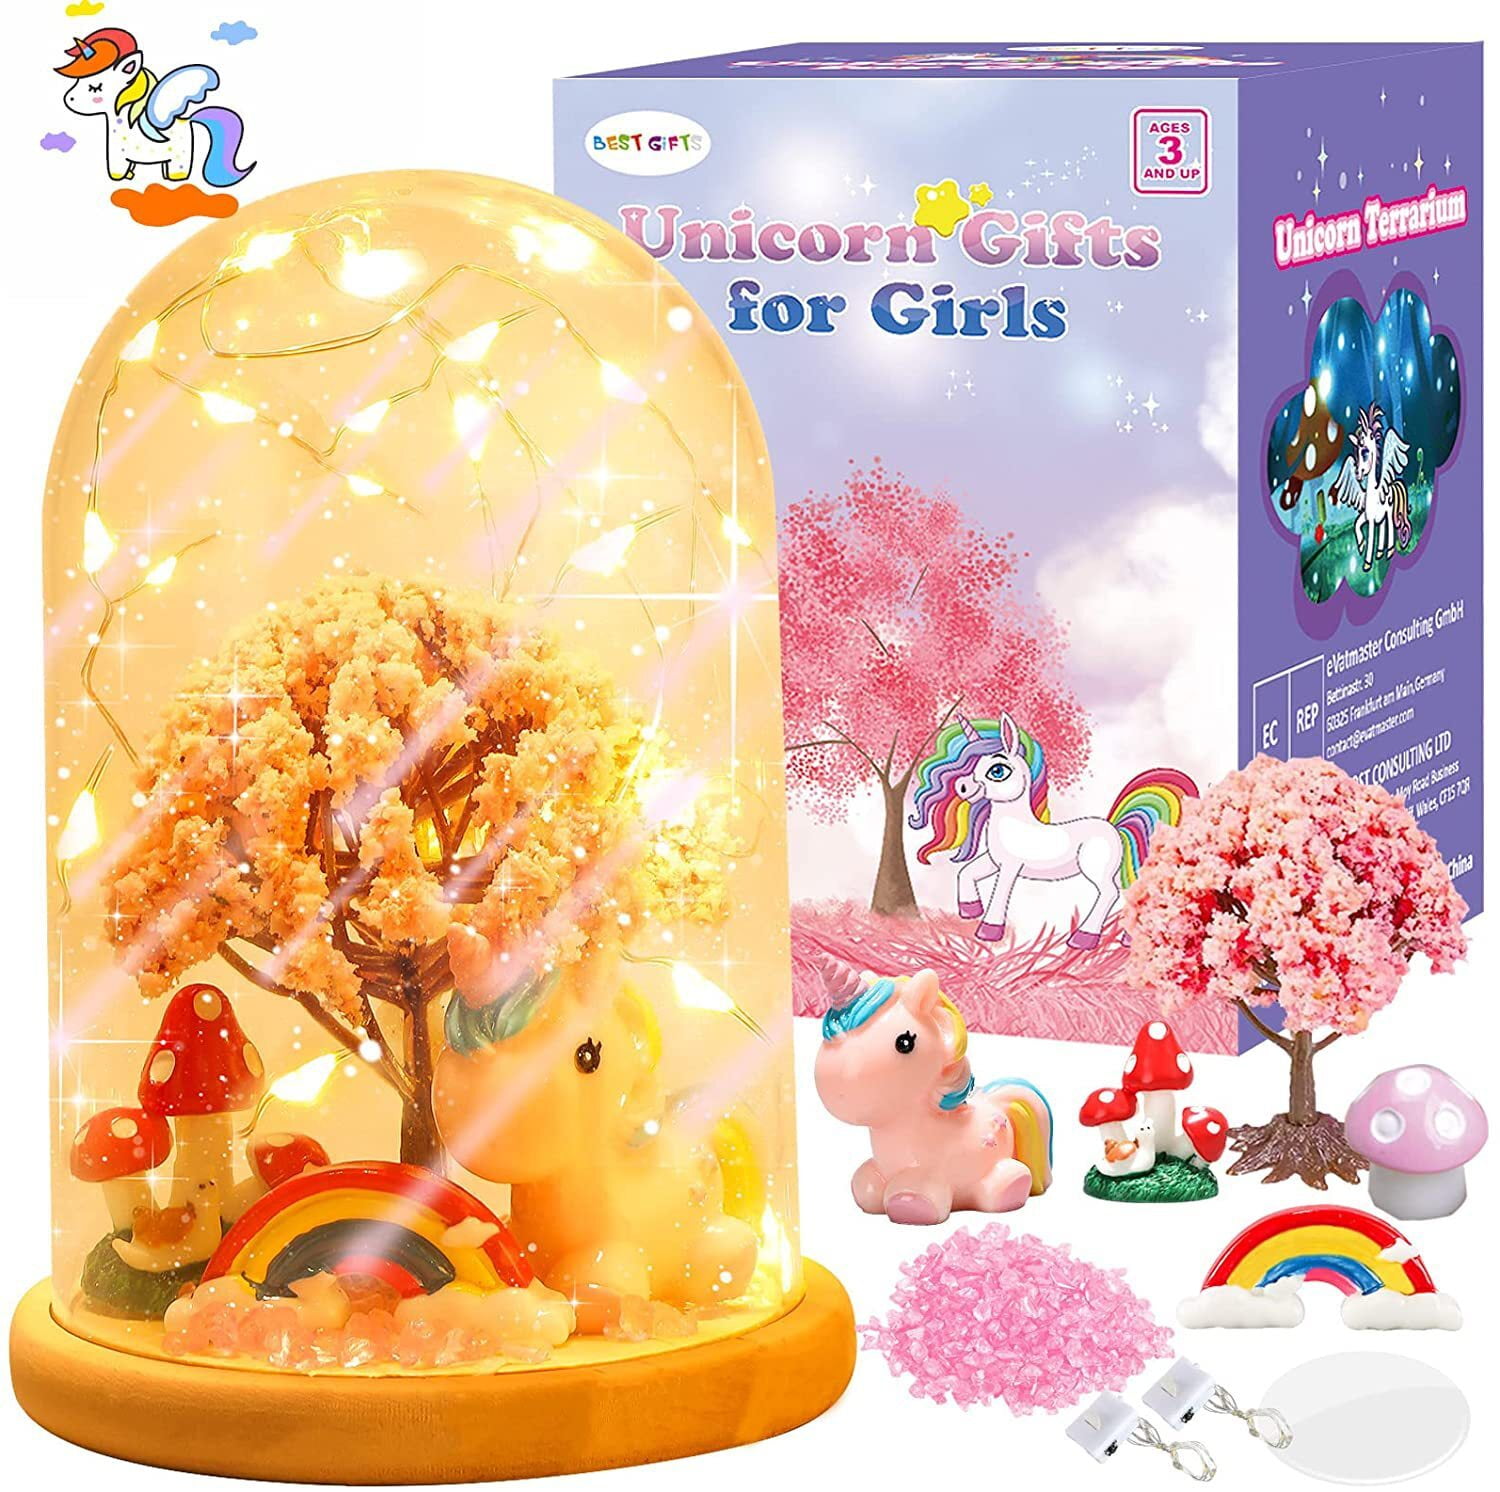 Girls Toys Age 6-8 8-12, Cute Unicorns Birthday Gifts for 4-12 Year Old Girls CR